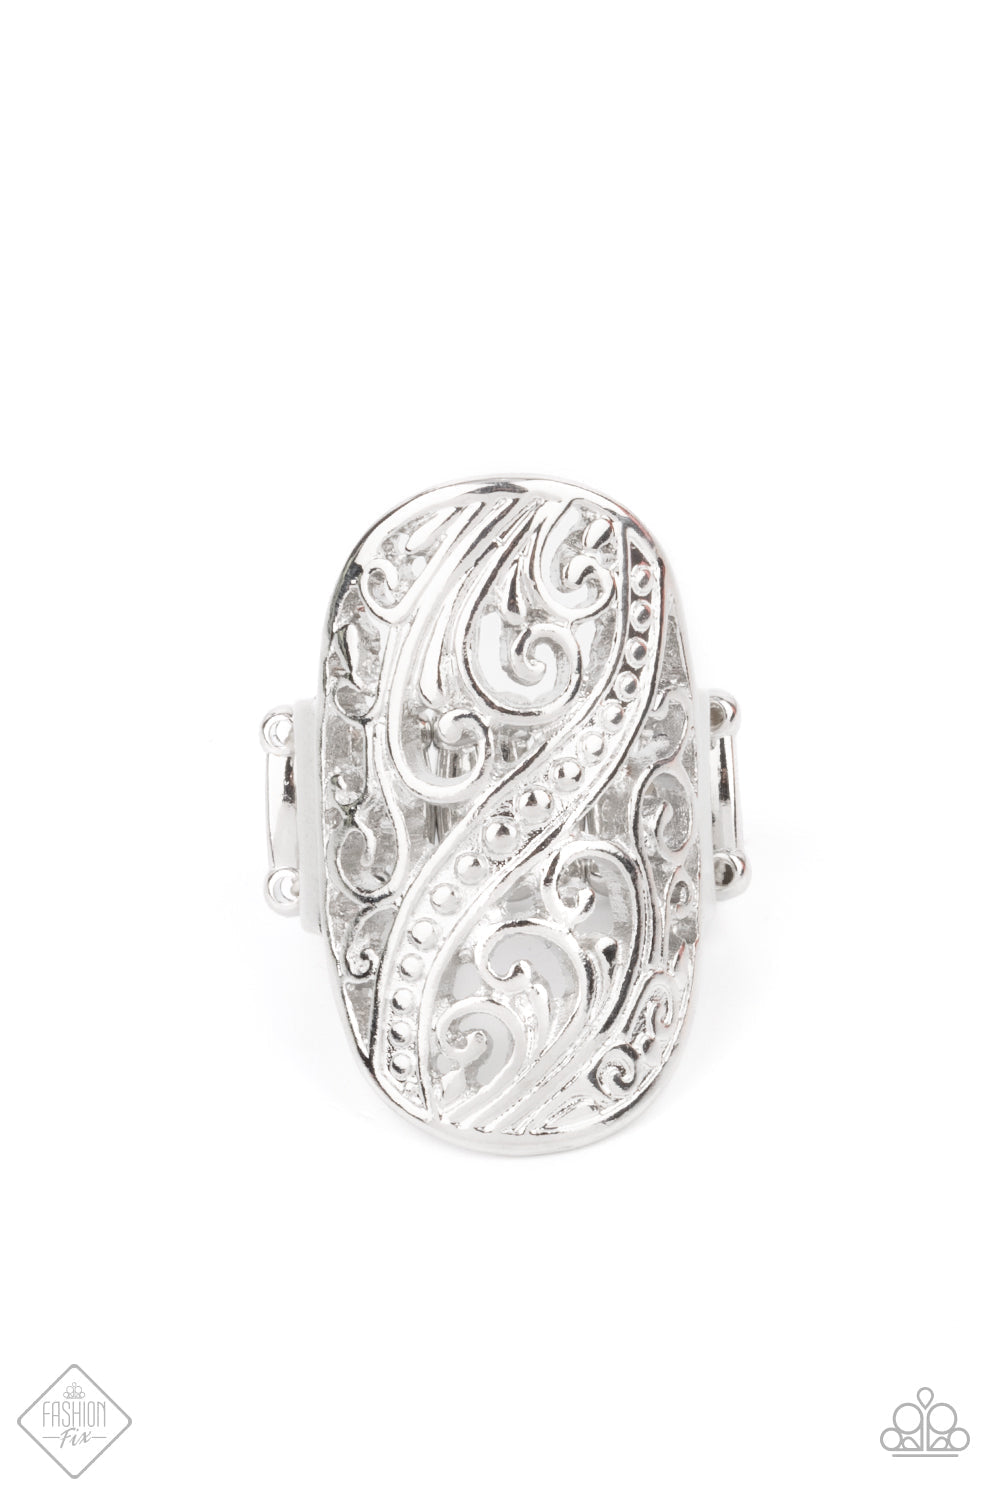 Pier Paradise - Silver Botanical Ring - Paparazzi Accessories - Antiqued silver finish, elegant frills and dotted designs swirl across an airy oval frame for a blossoming botanical allure fashion ring.